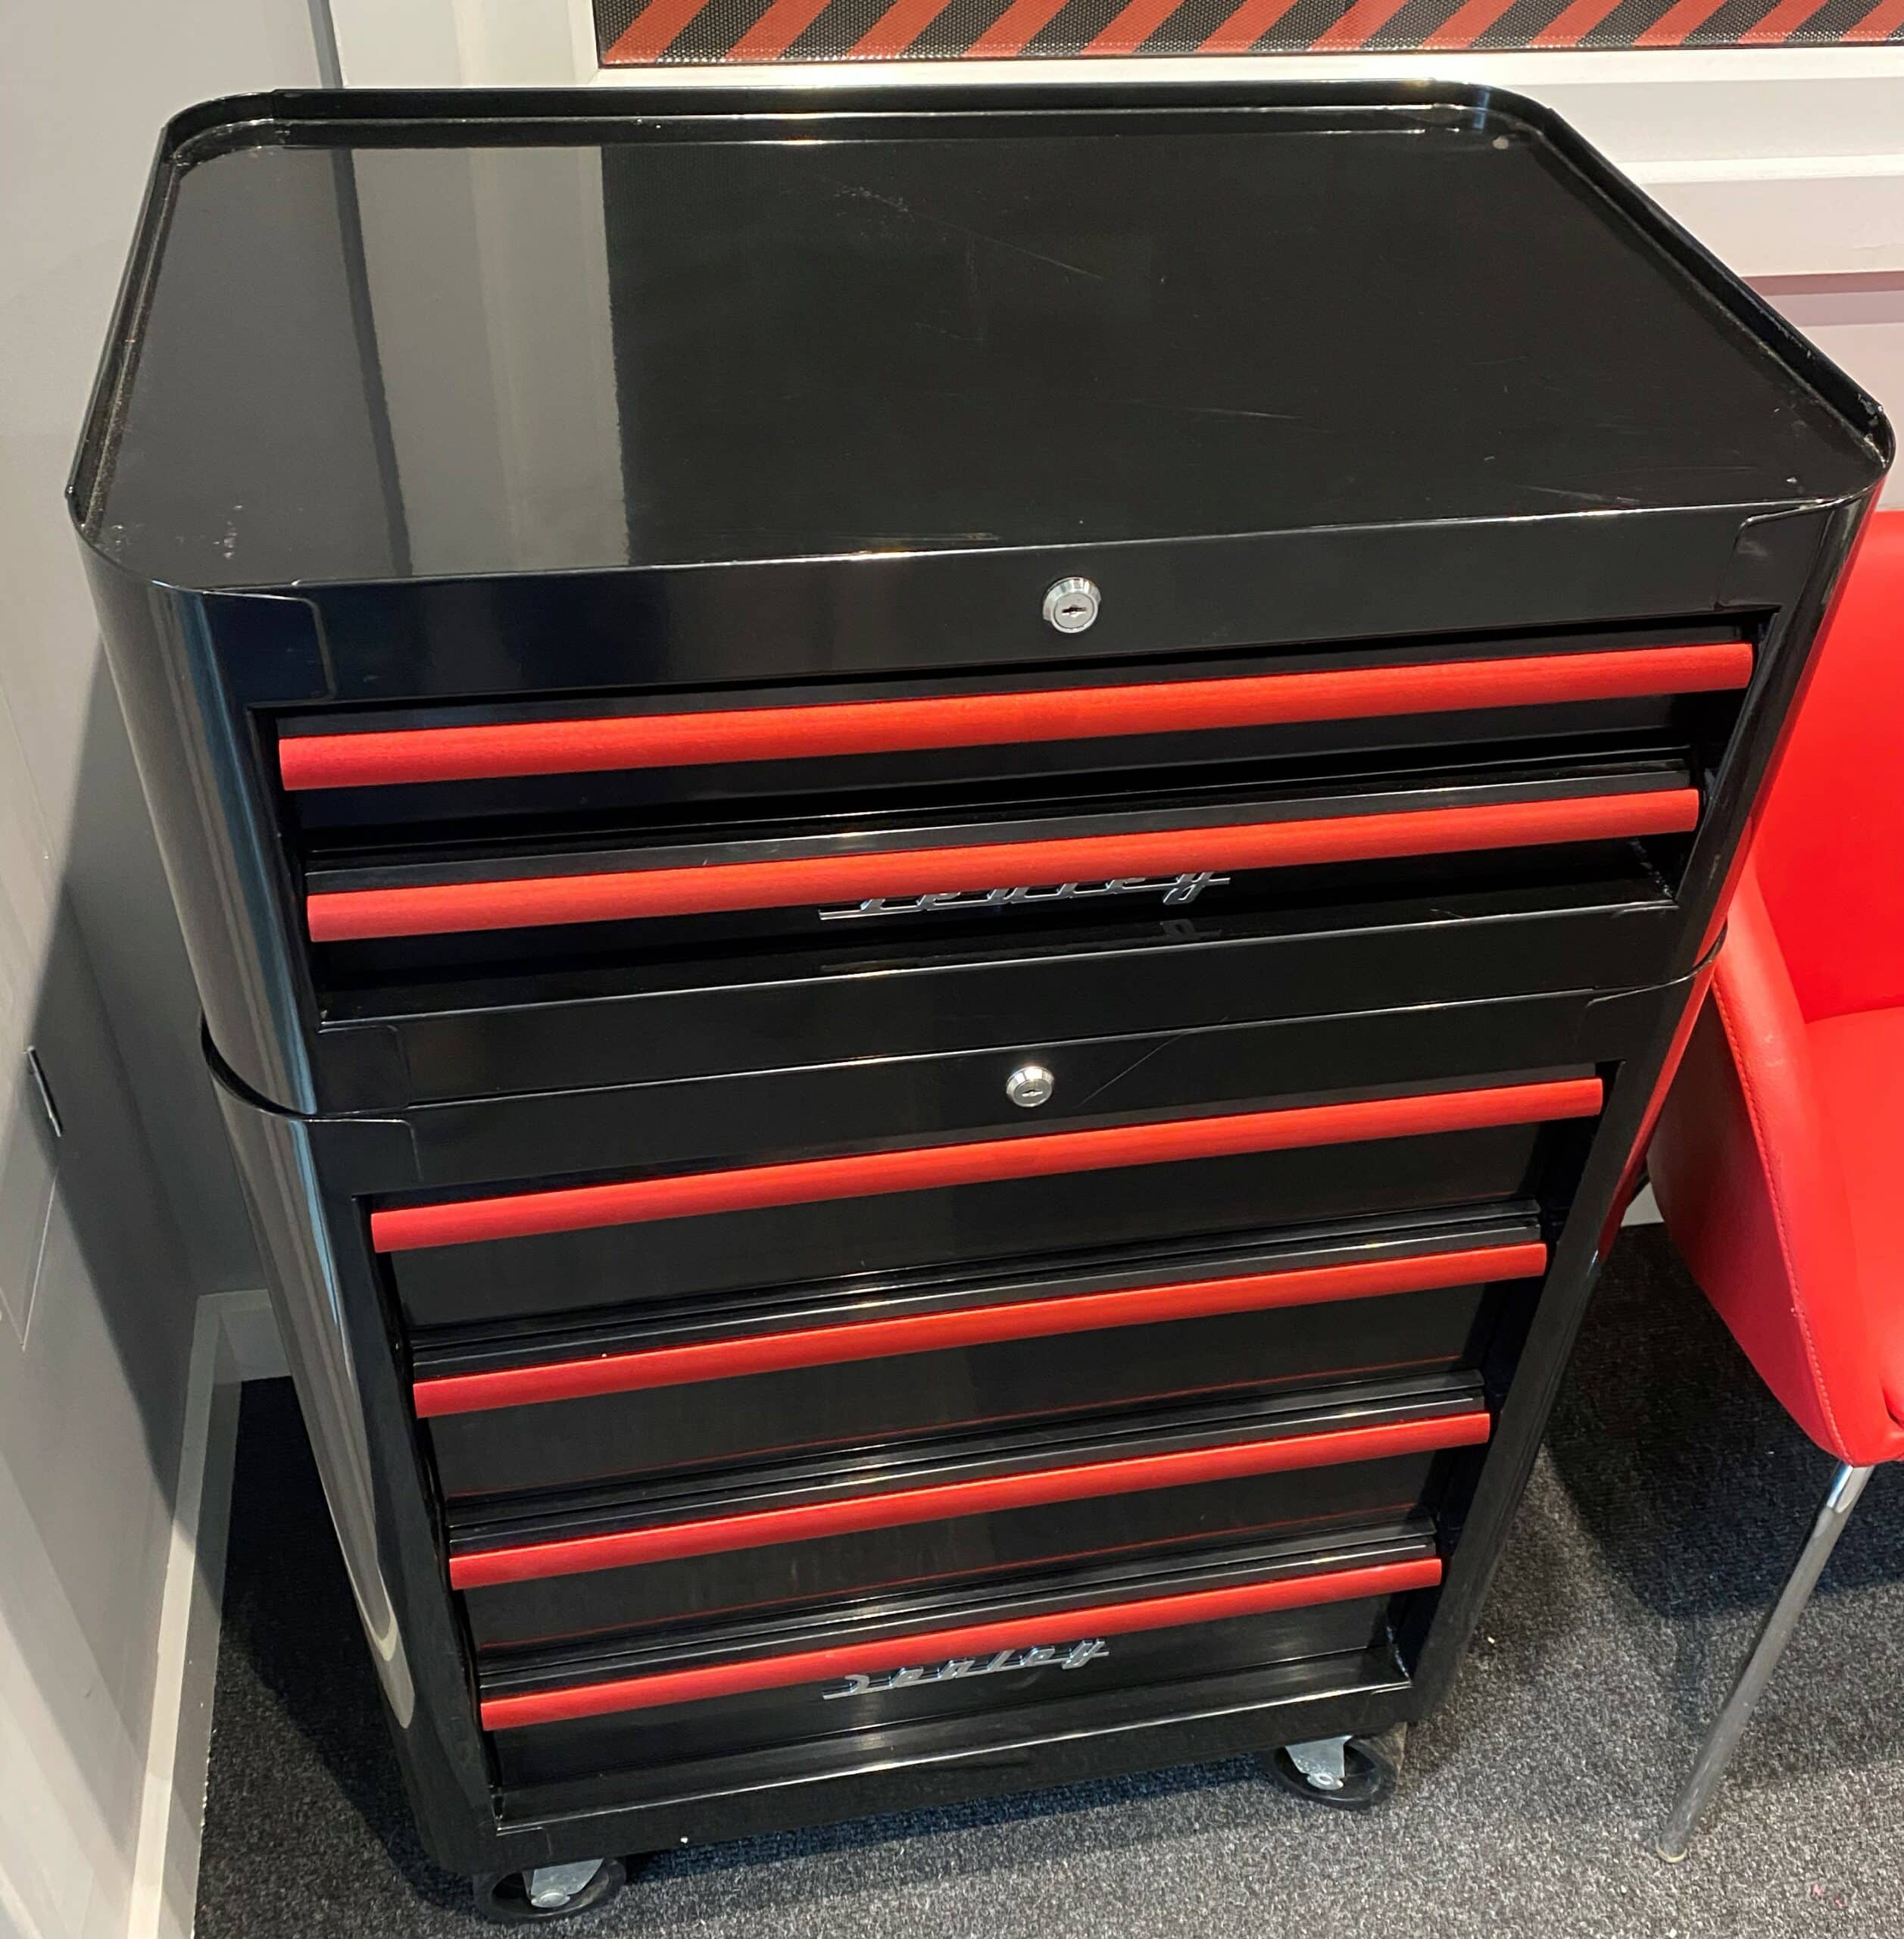 Sealey 6 drawer roll cal unit, decked drawers in black and red for tools